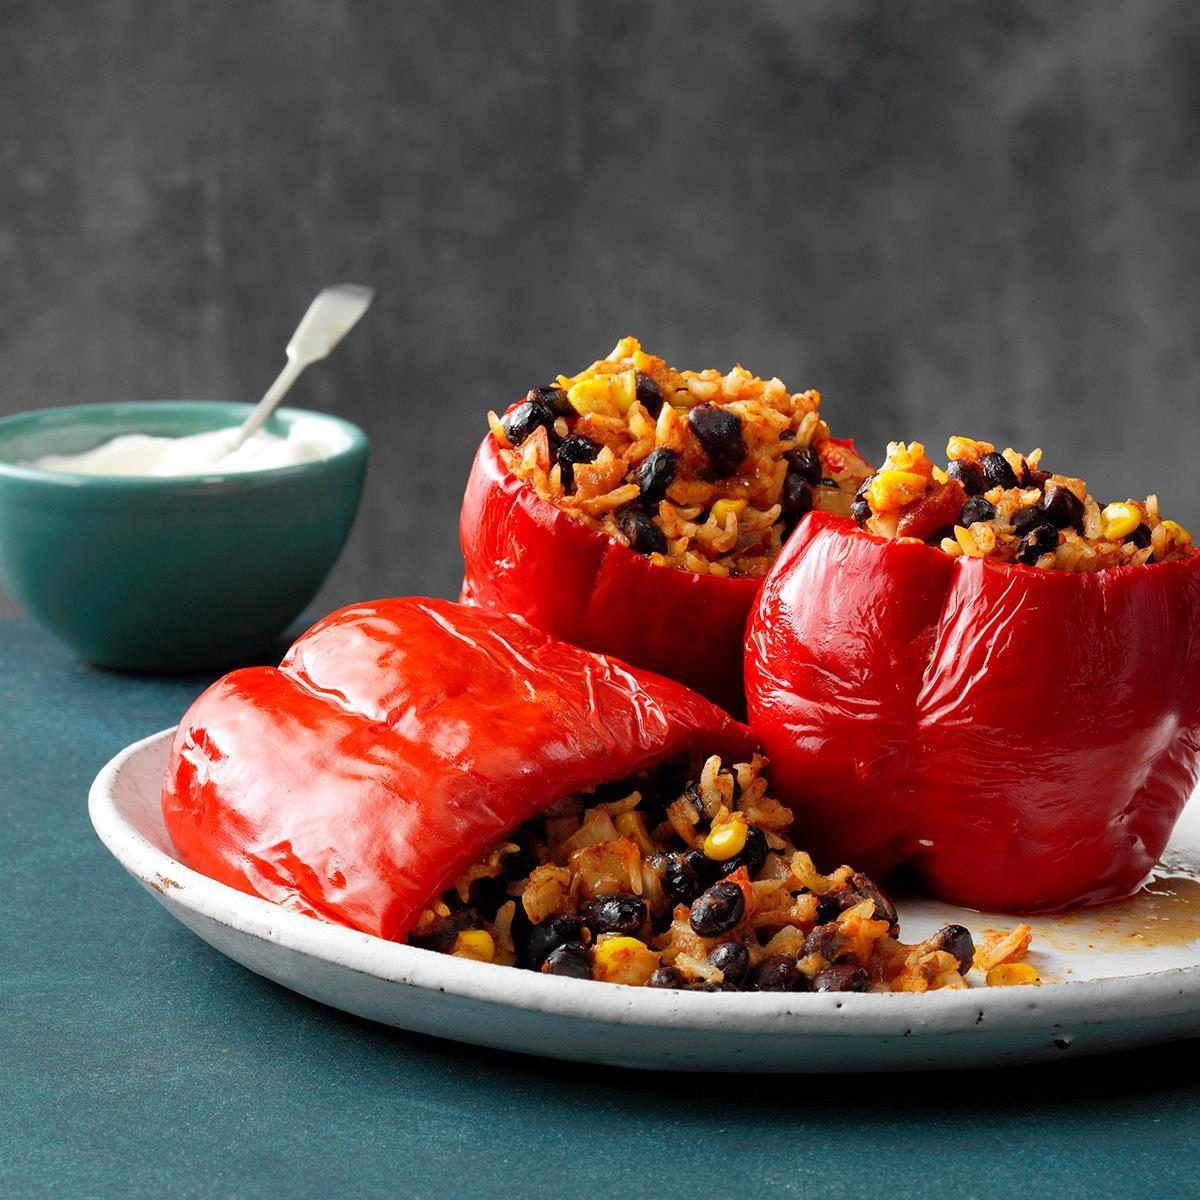 Day 26: Slow-Cooked Stuffed Peppers